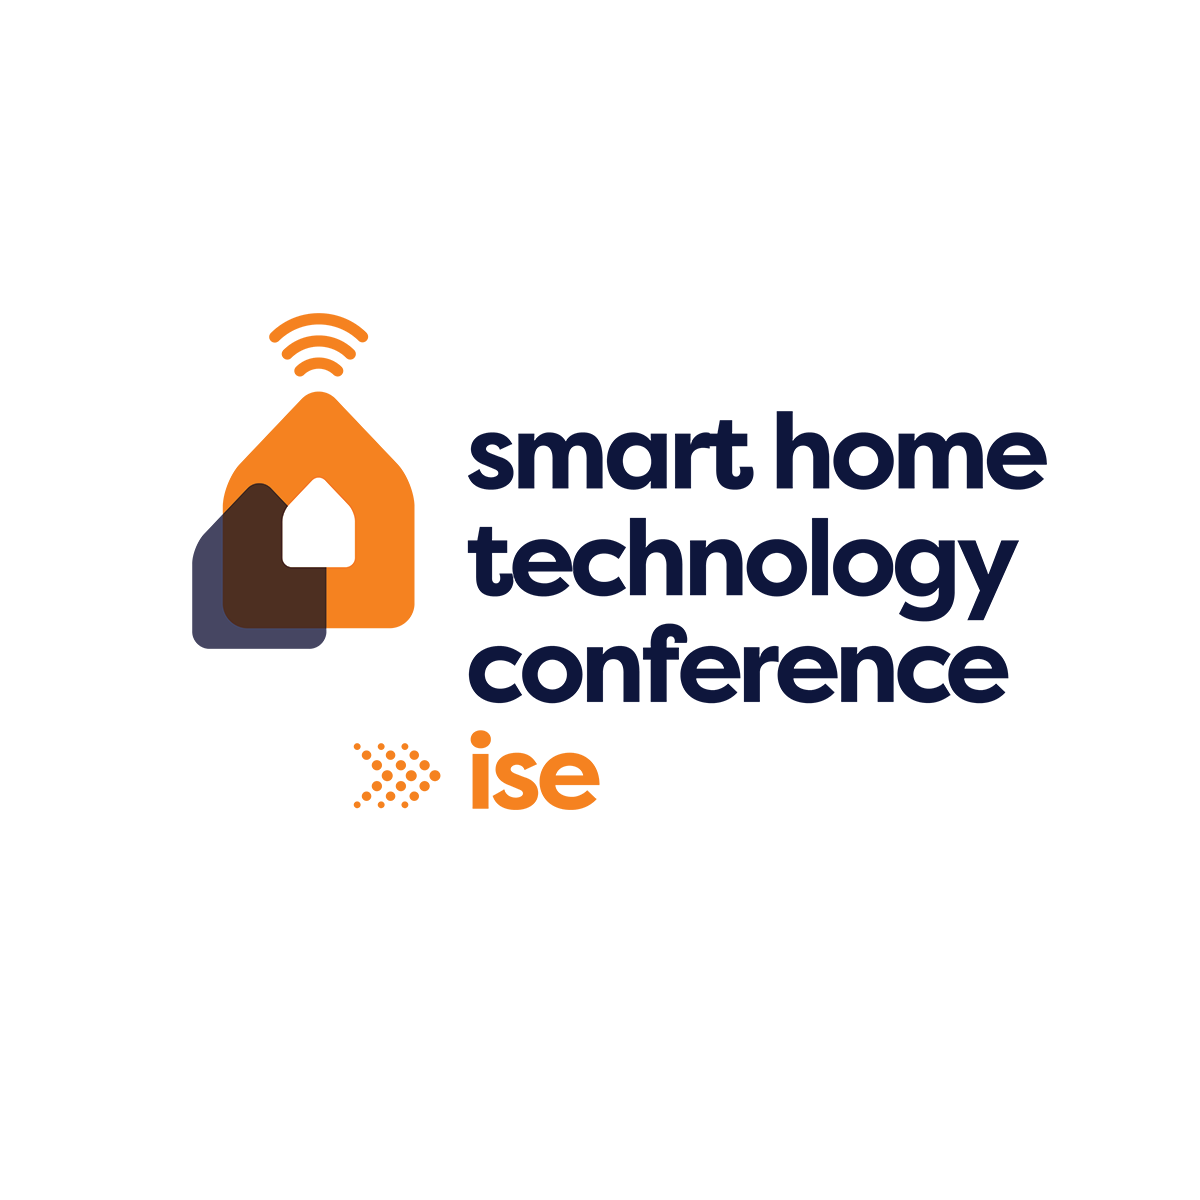 Smart Home Technology conference